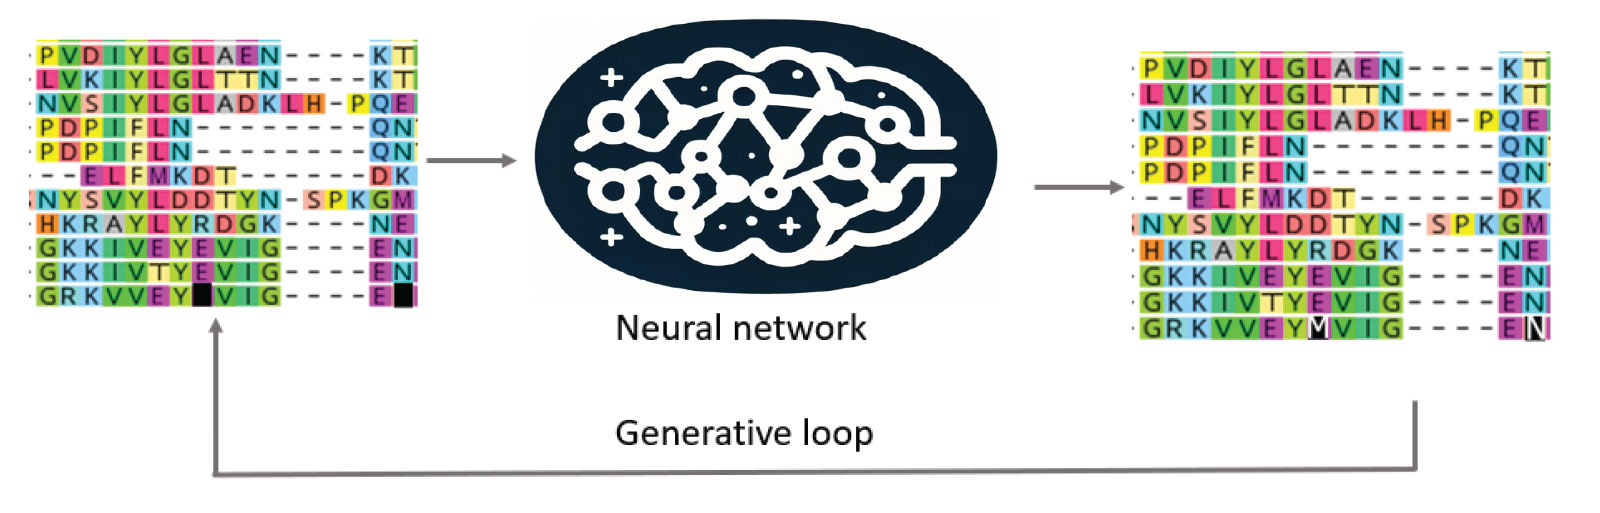 Simplified graphic showing deep learning models for enzyme discovery